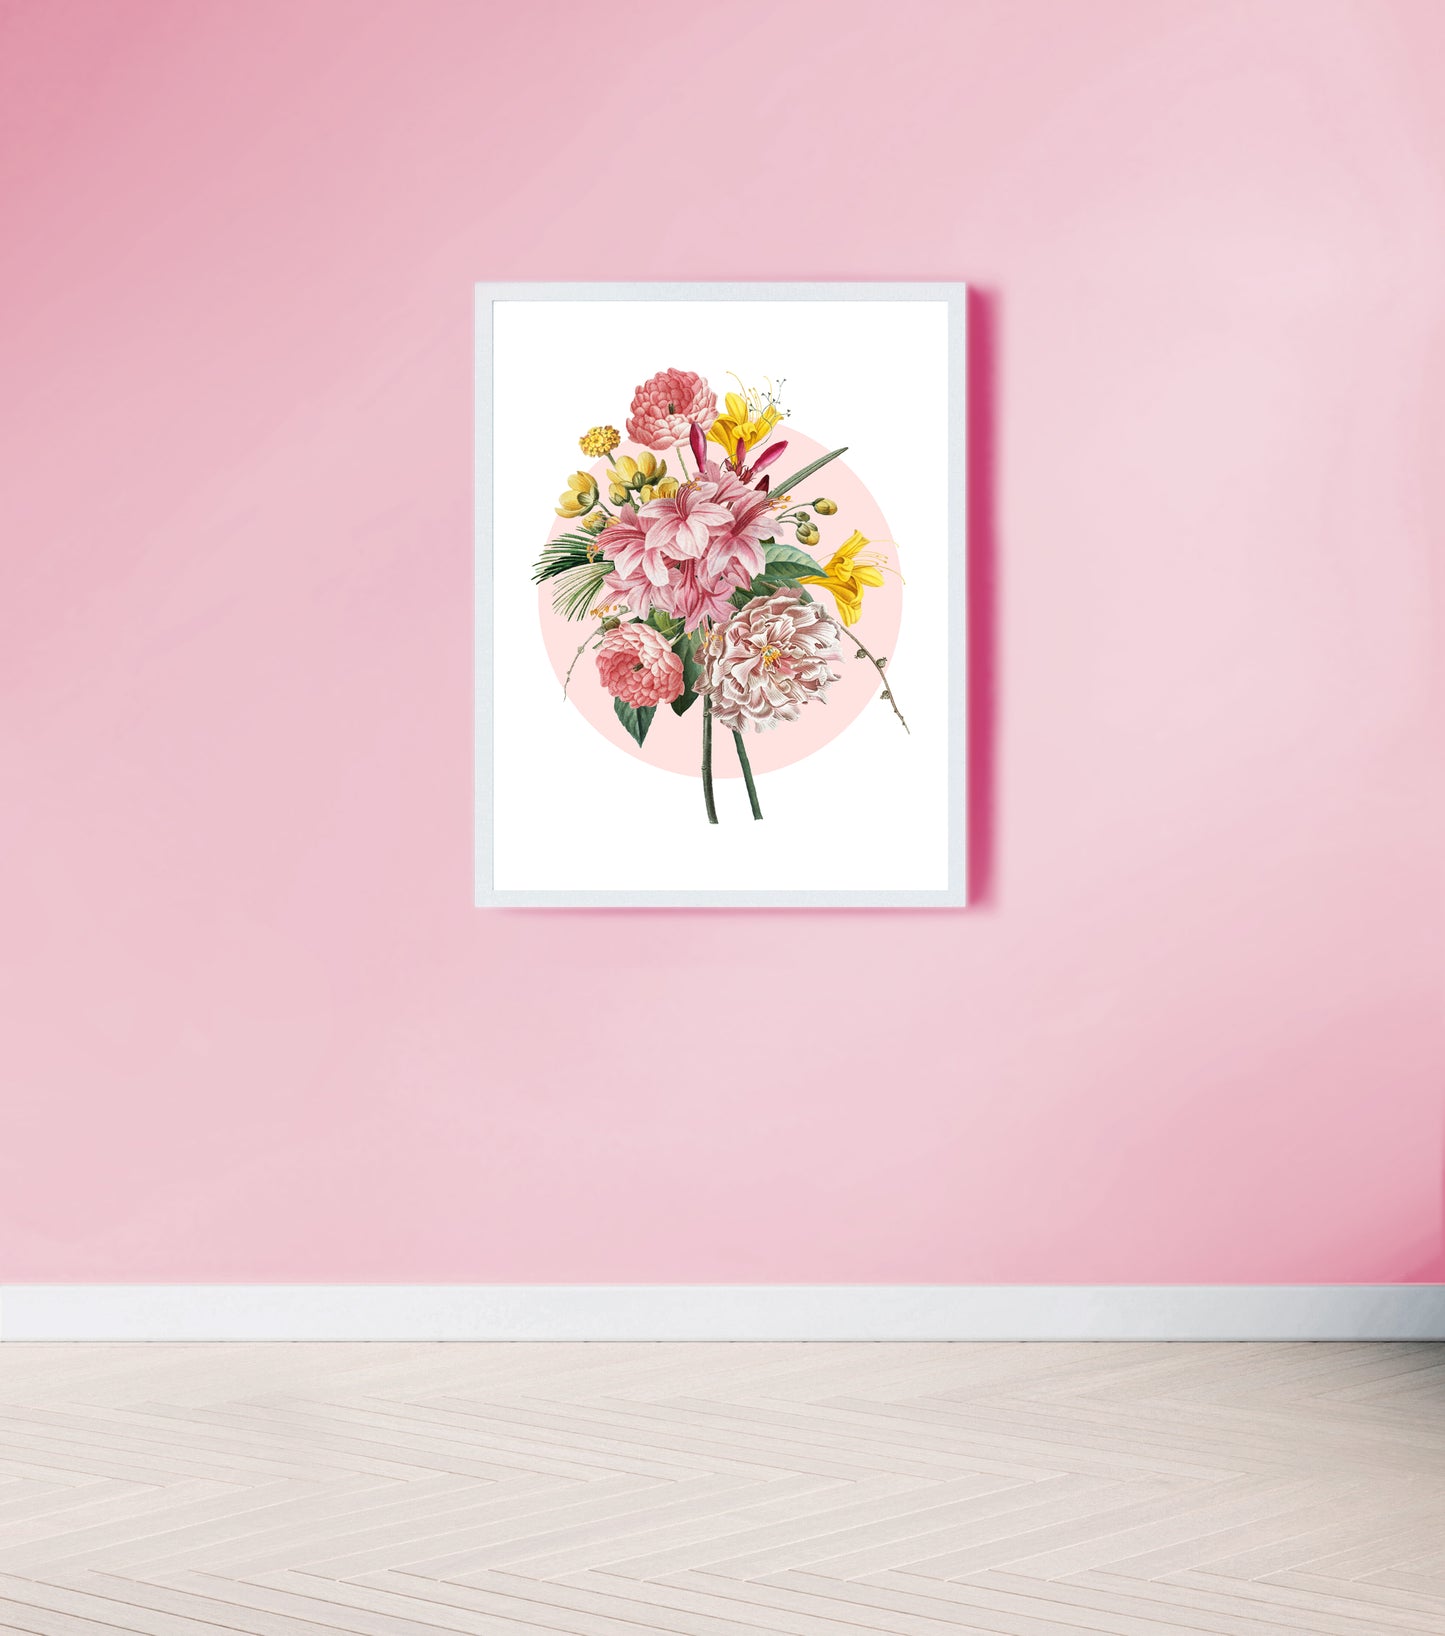 Vintage floral pink and yellow bouquet print